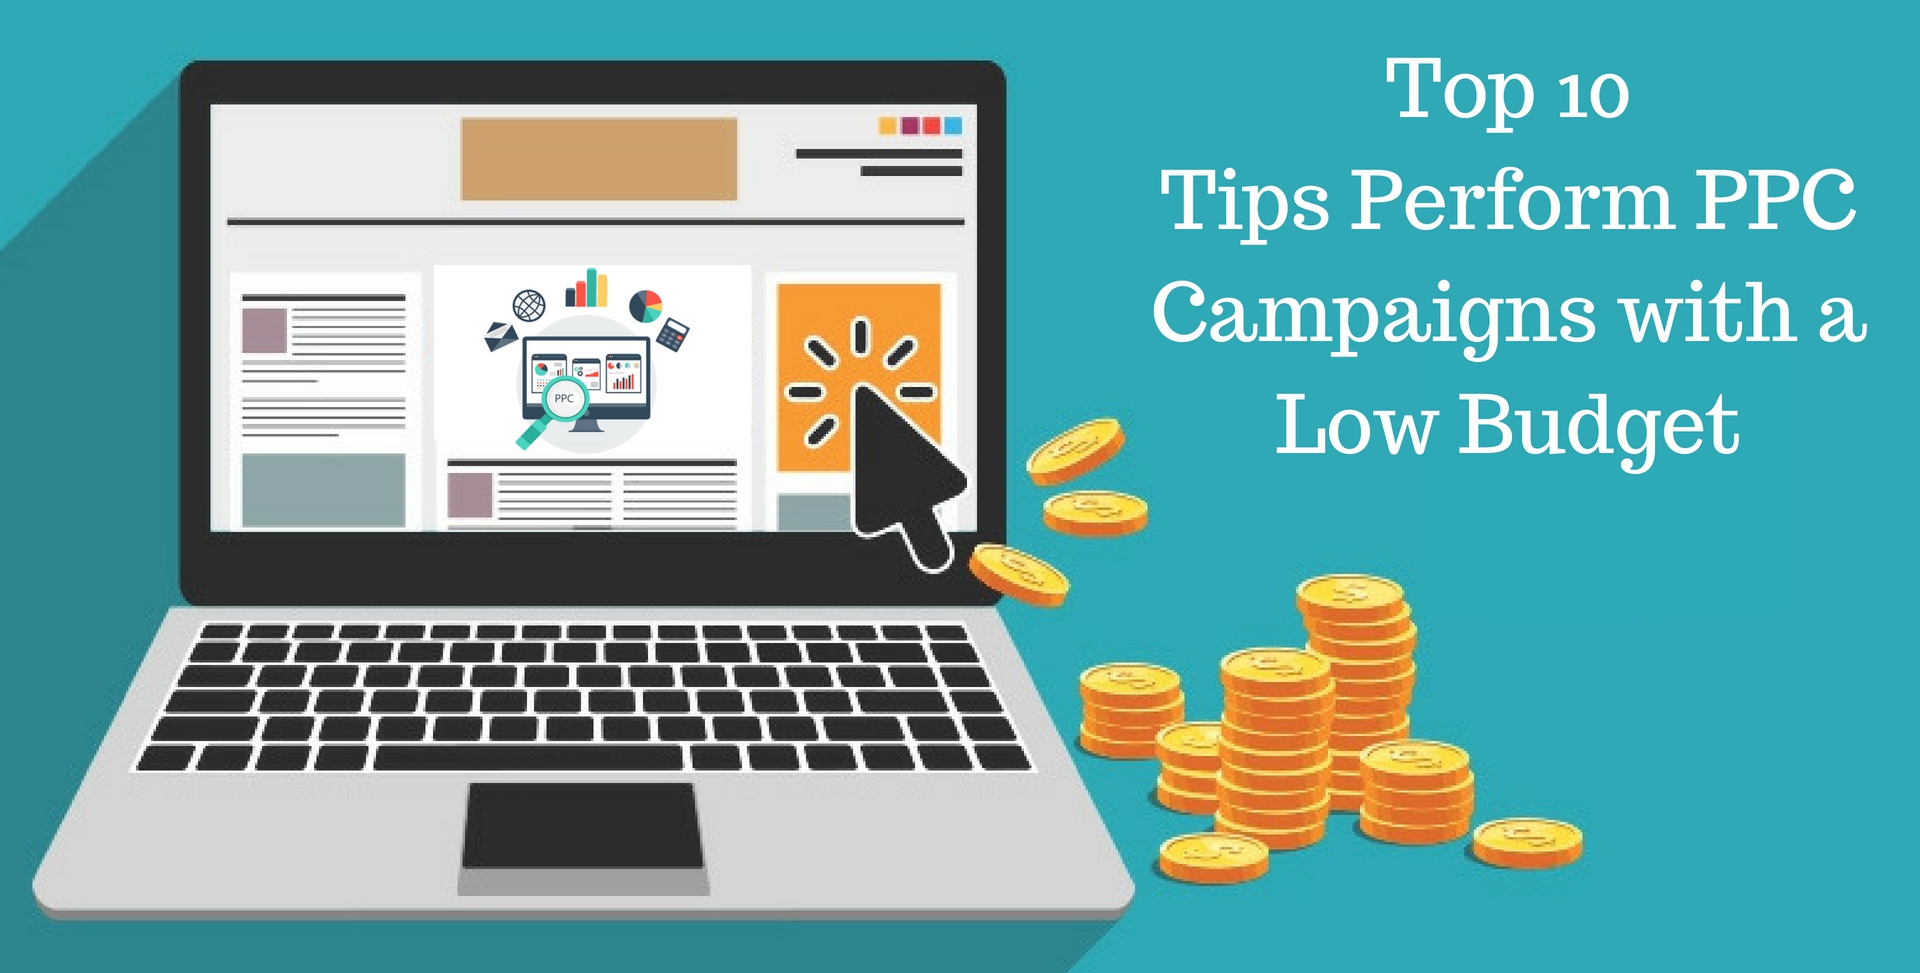 Top 10 Tips to Perform Well in PPC Campaigns with a Low Budget